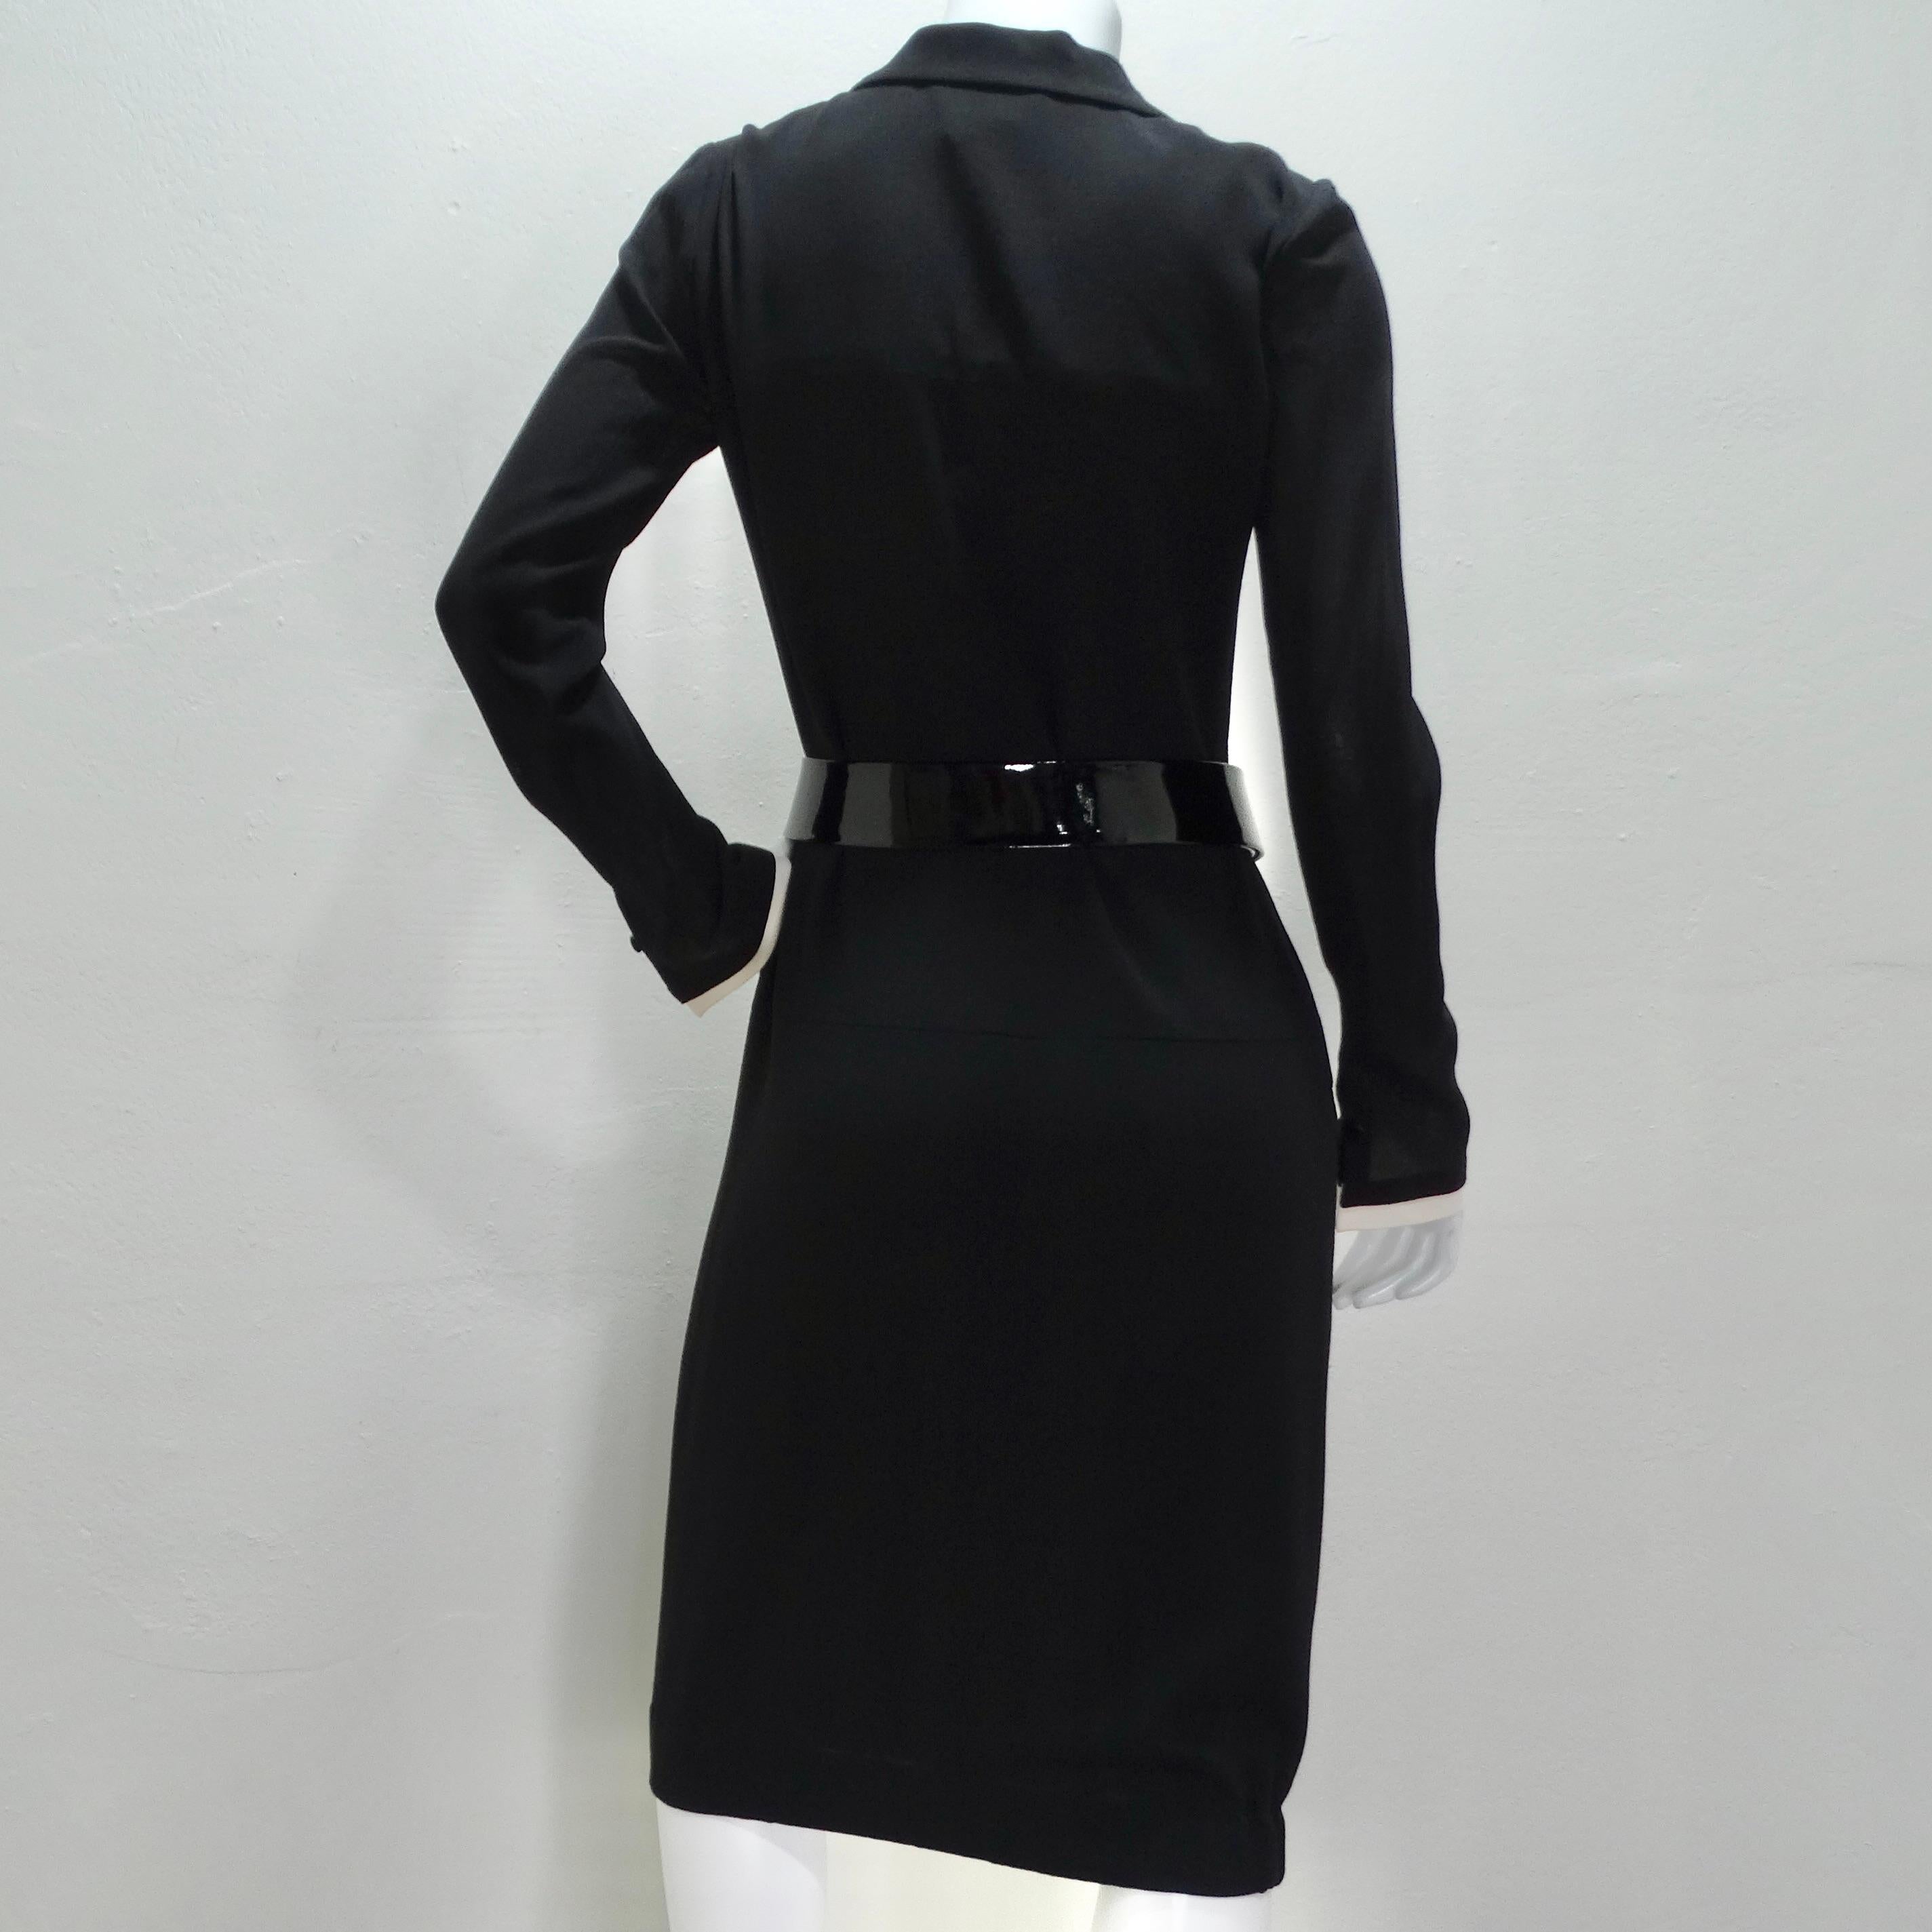 Chanel 2004 Black Button Up Collared Dress and Belt For Sale 5